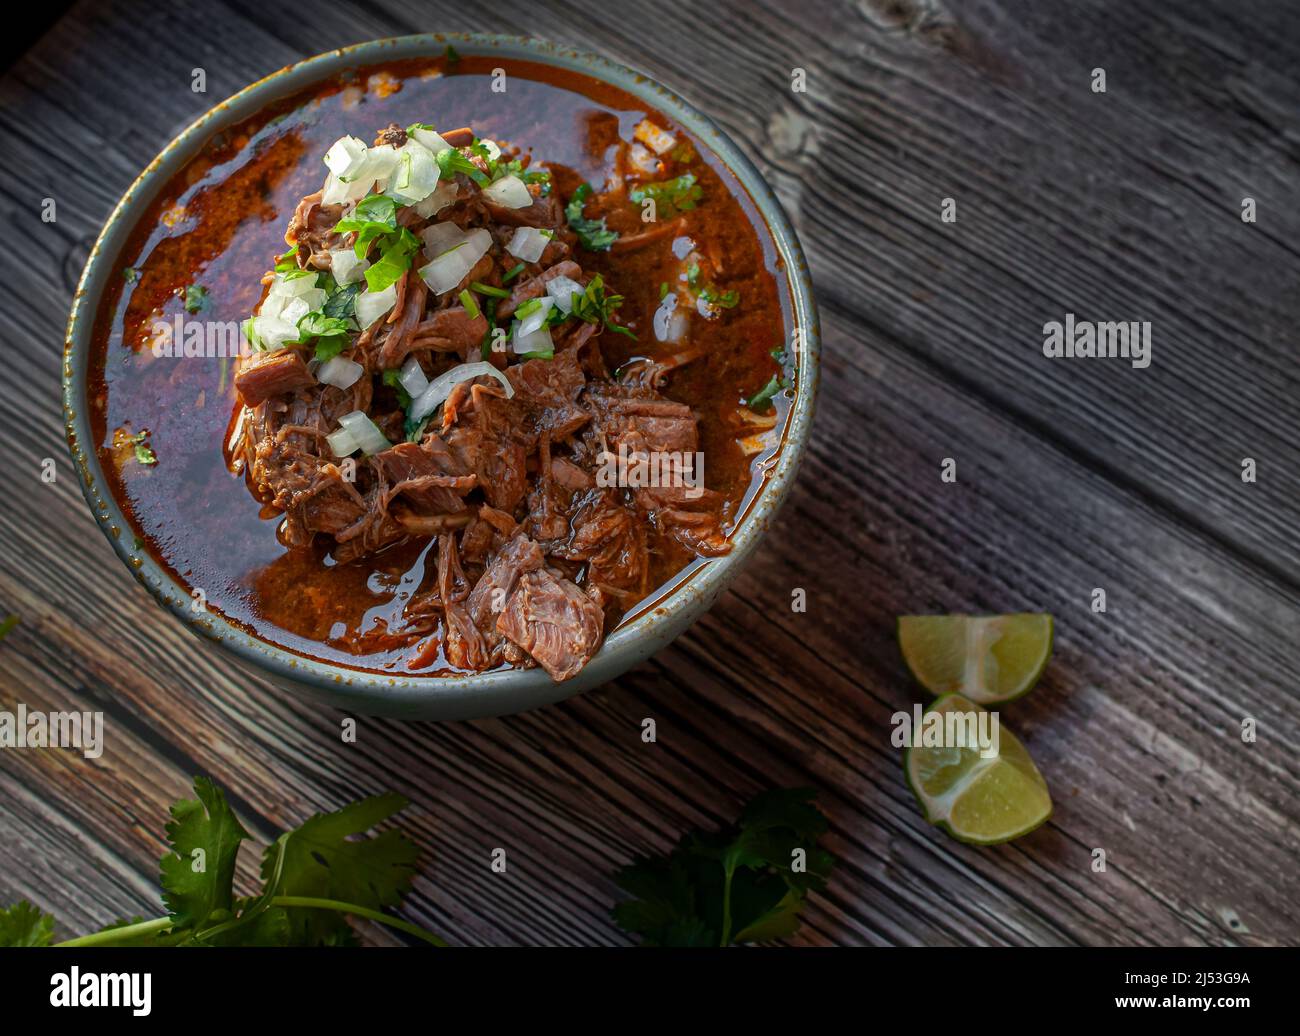 A bowl of BIRRIA or BARBACOA, a traditional Mexican dish with lemons and  cilantro on the side over a wooden table Stock Photo - Alamy